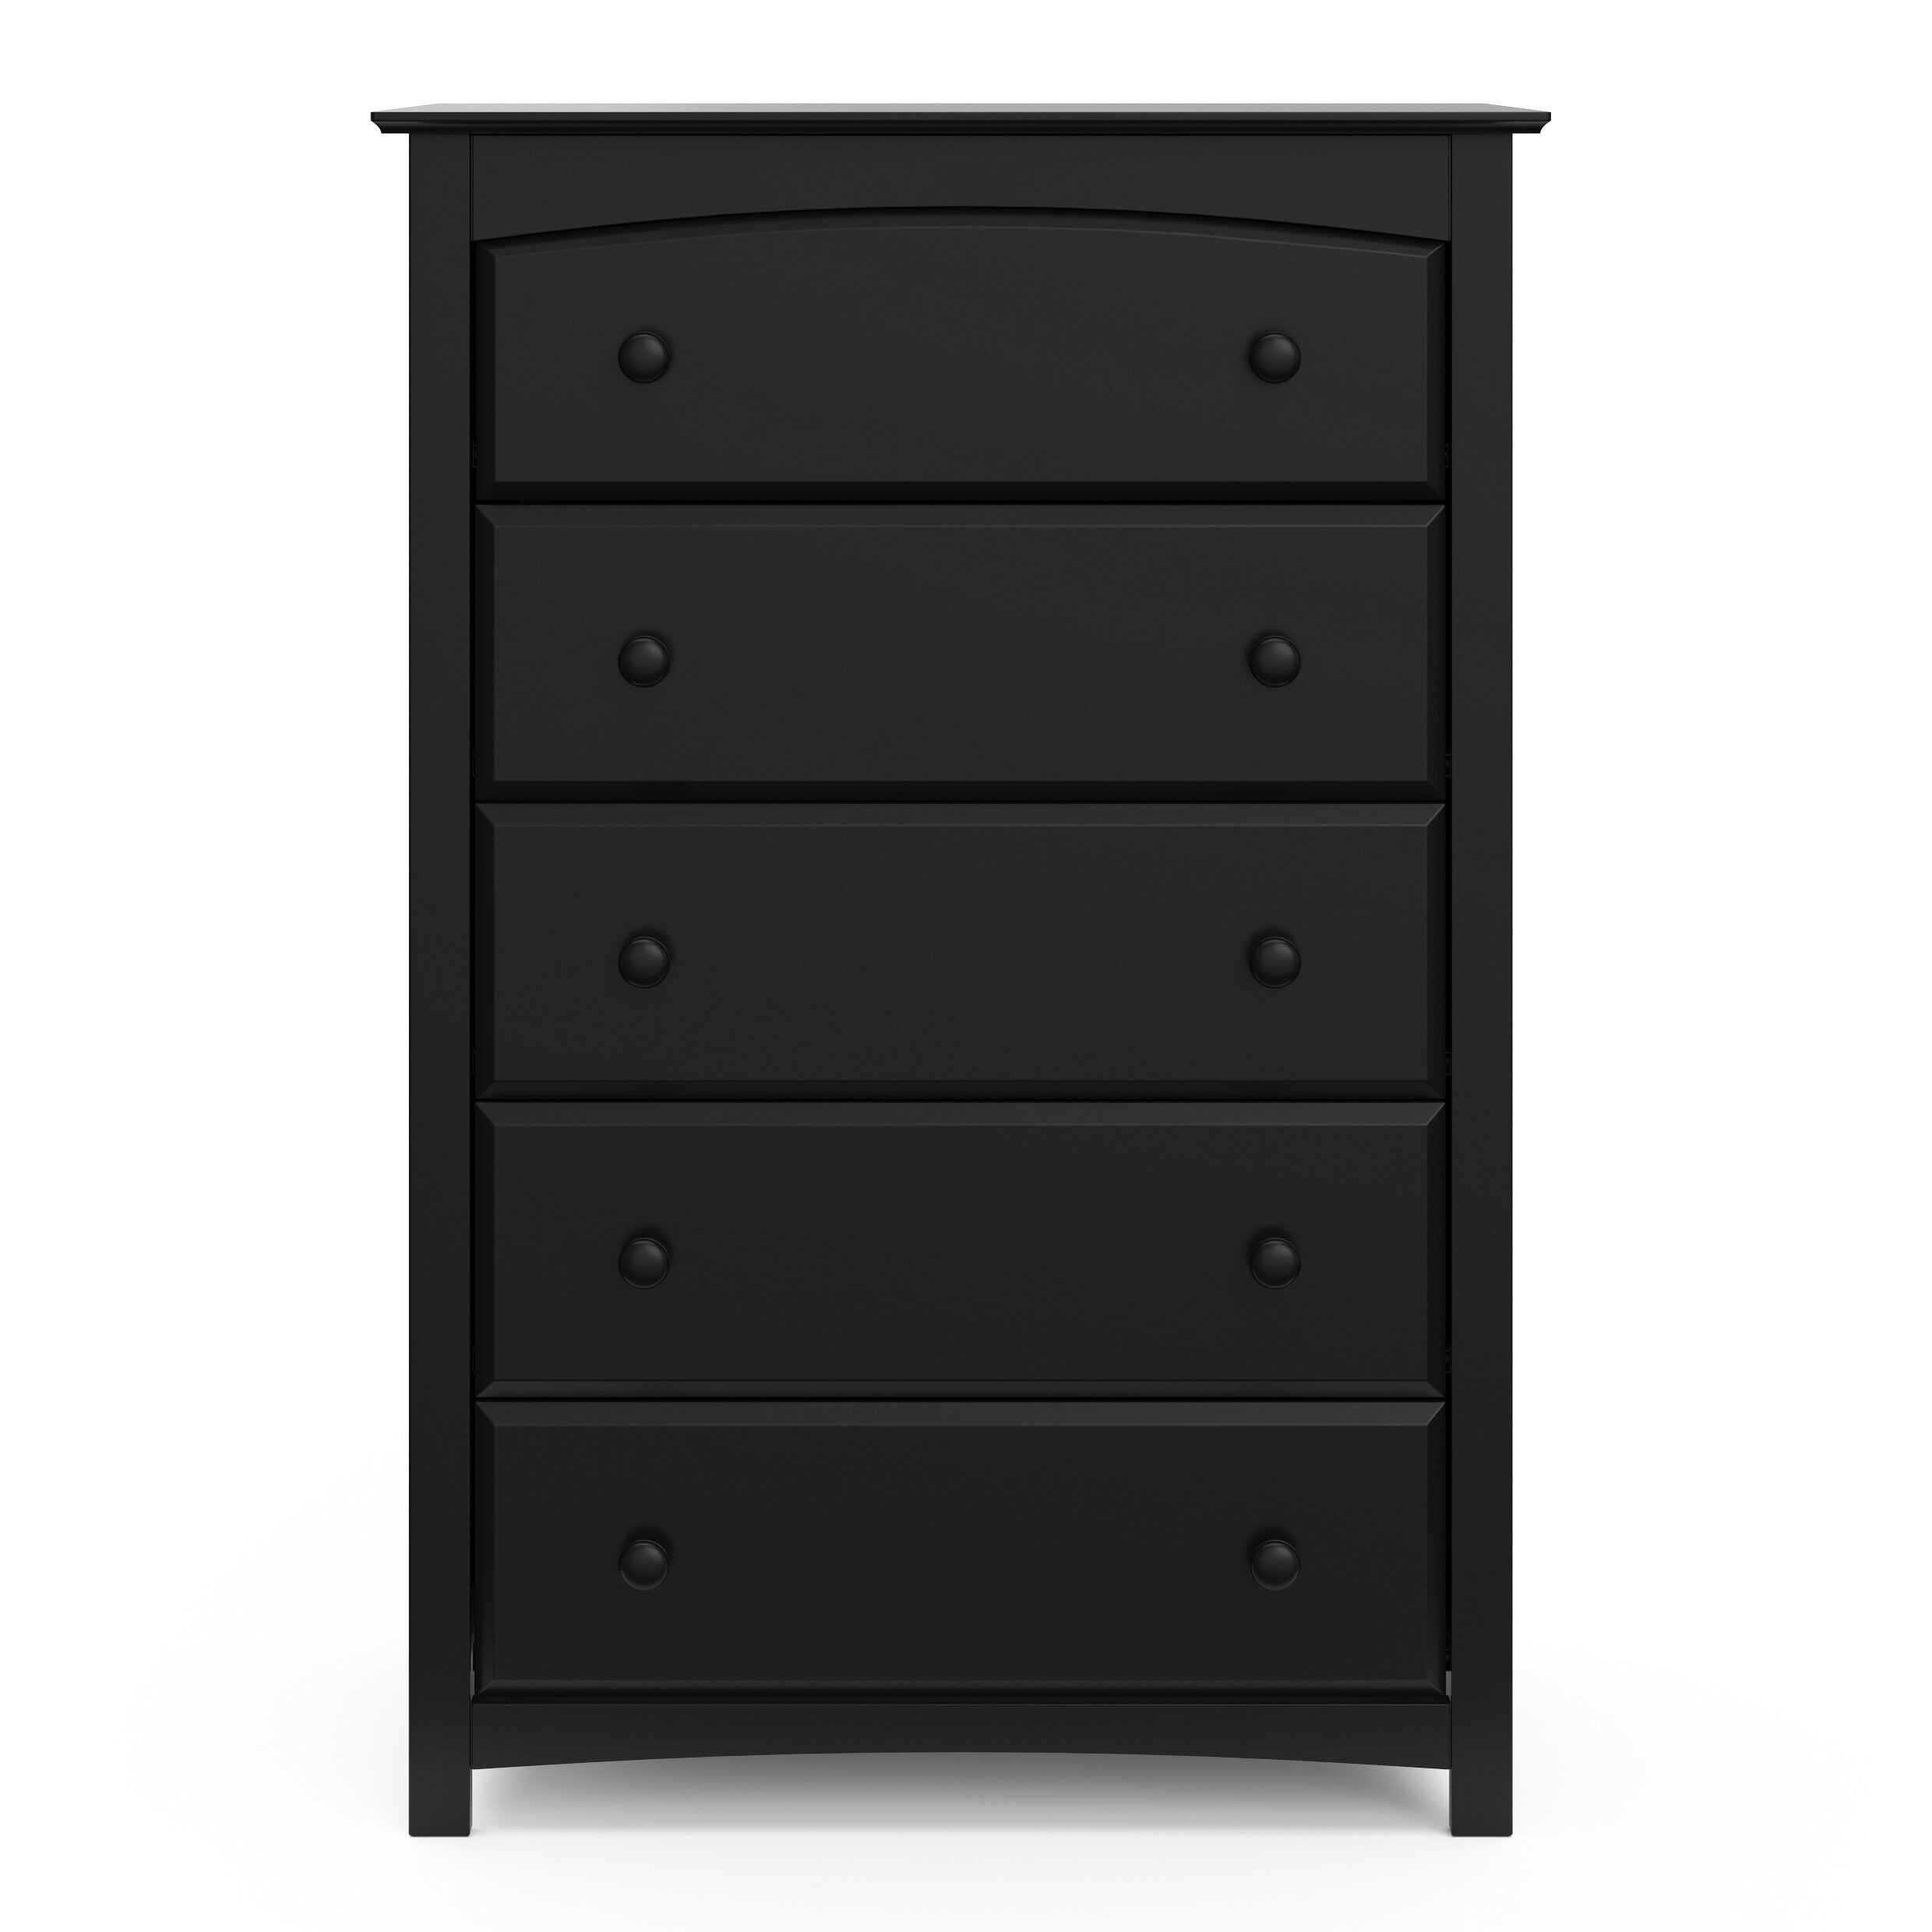 Ideal for Nursery Toddlers Room Kids Room Wood and Composite Construction Kids Bedroom Dresser with 5 Drawers Pebble Gray Storkcraft Kenton 5 Drawer Universal Dresser 